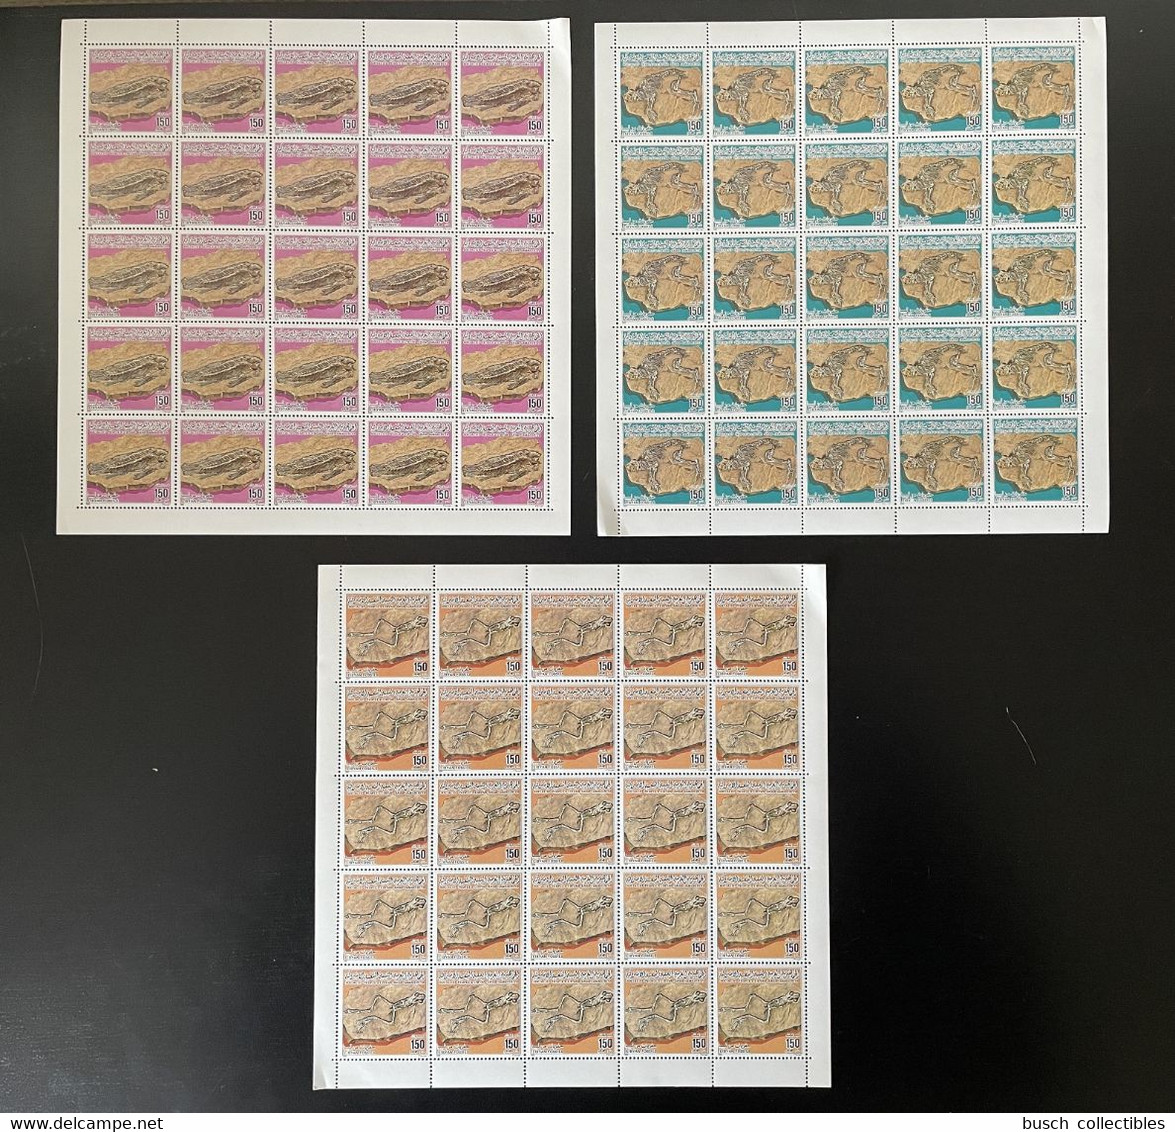 Libye Libya 1985 Mi. 1478 - 1480 Libyan Fossils Fossilien Fossiles Full Sheets Of 25 Stamps RARE SCARCE - Archäologie